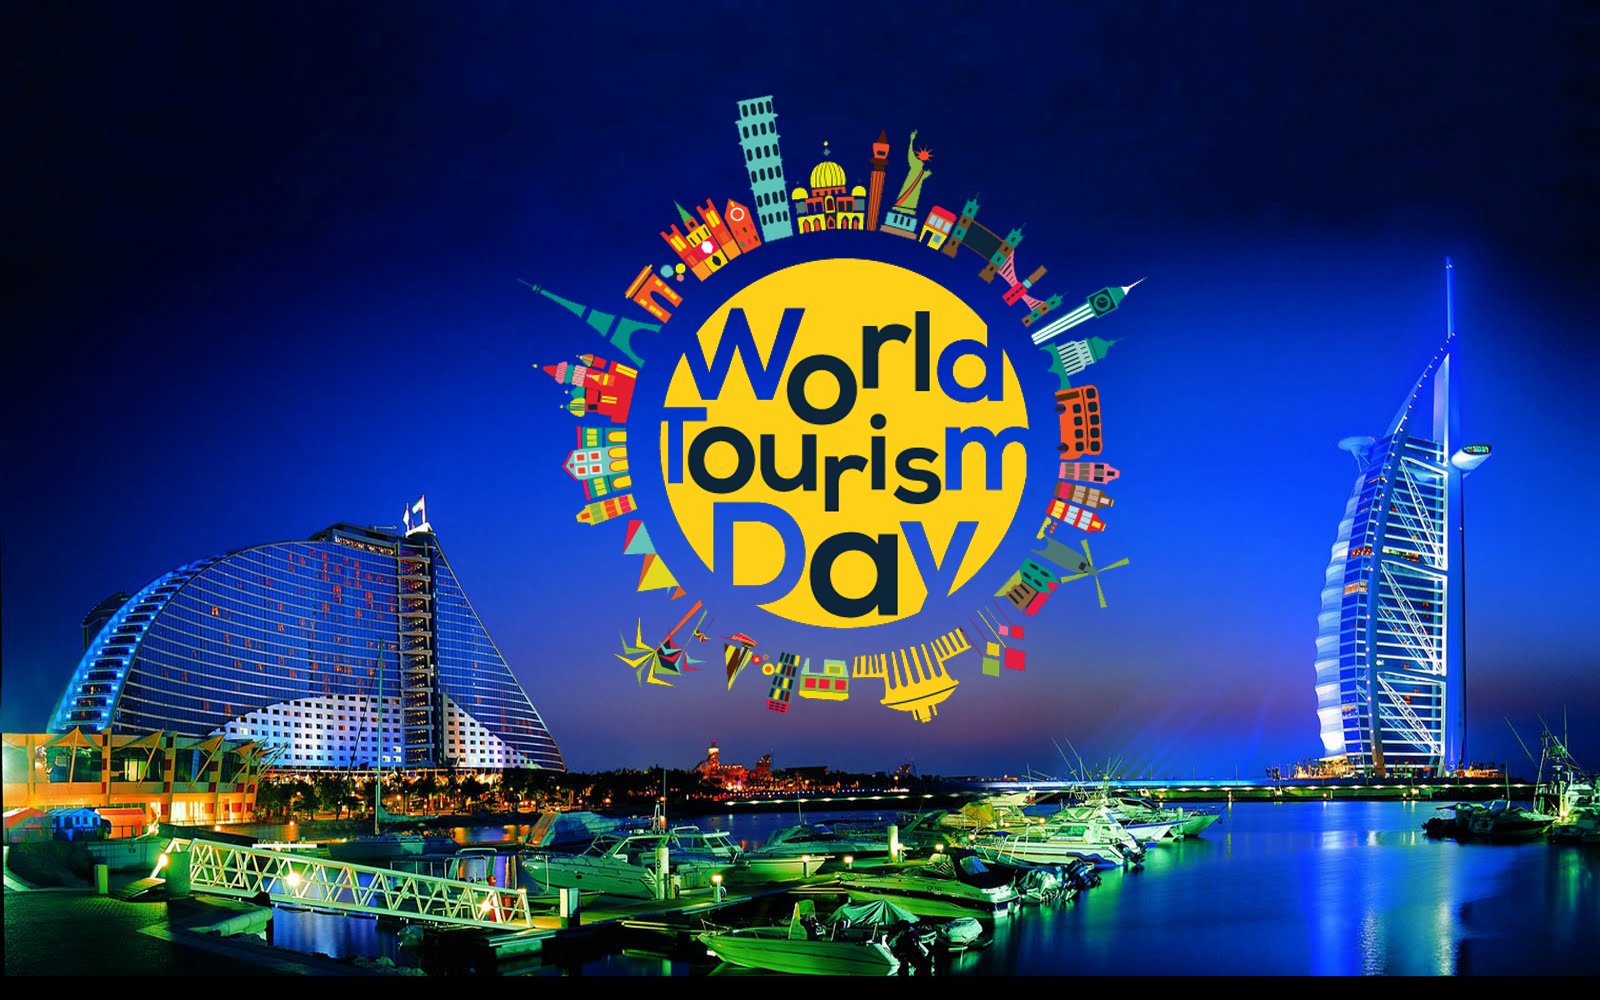 Best World Tourism Day Quotes, Image & Wallpaper Tourism Day 2019